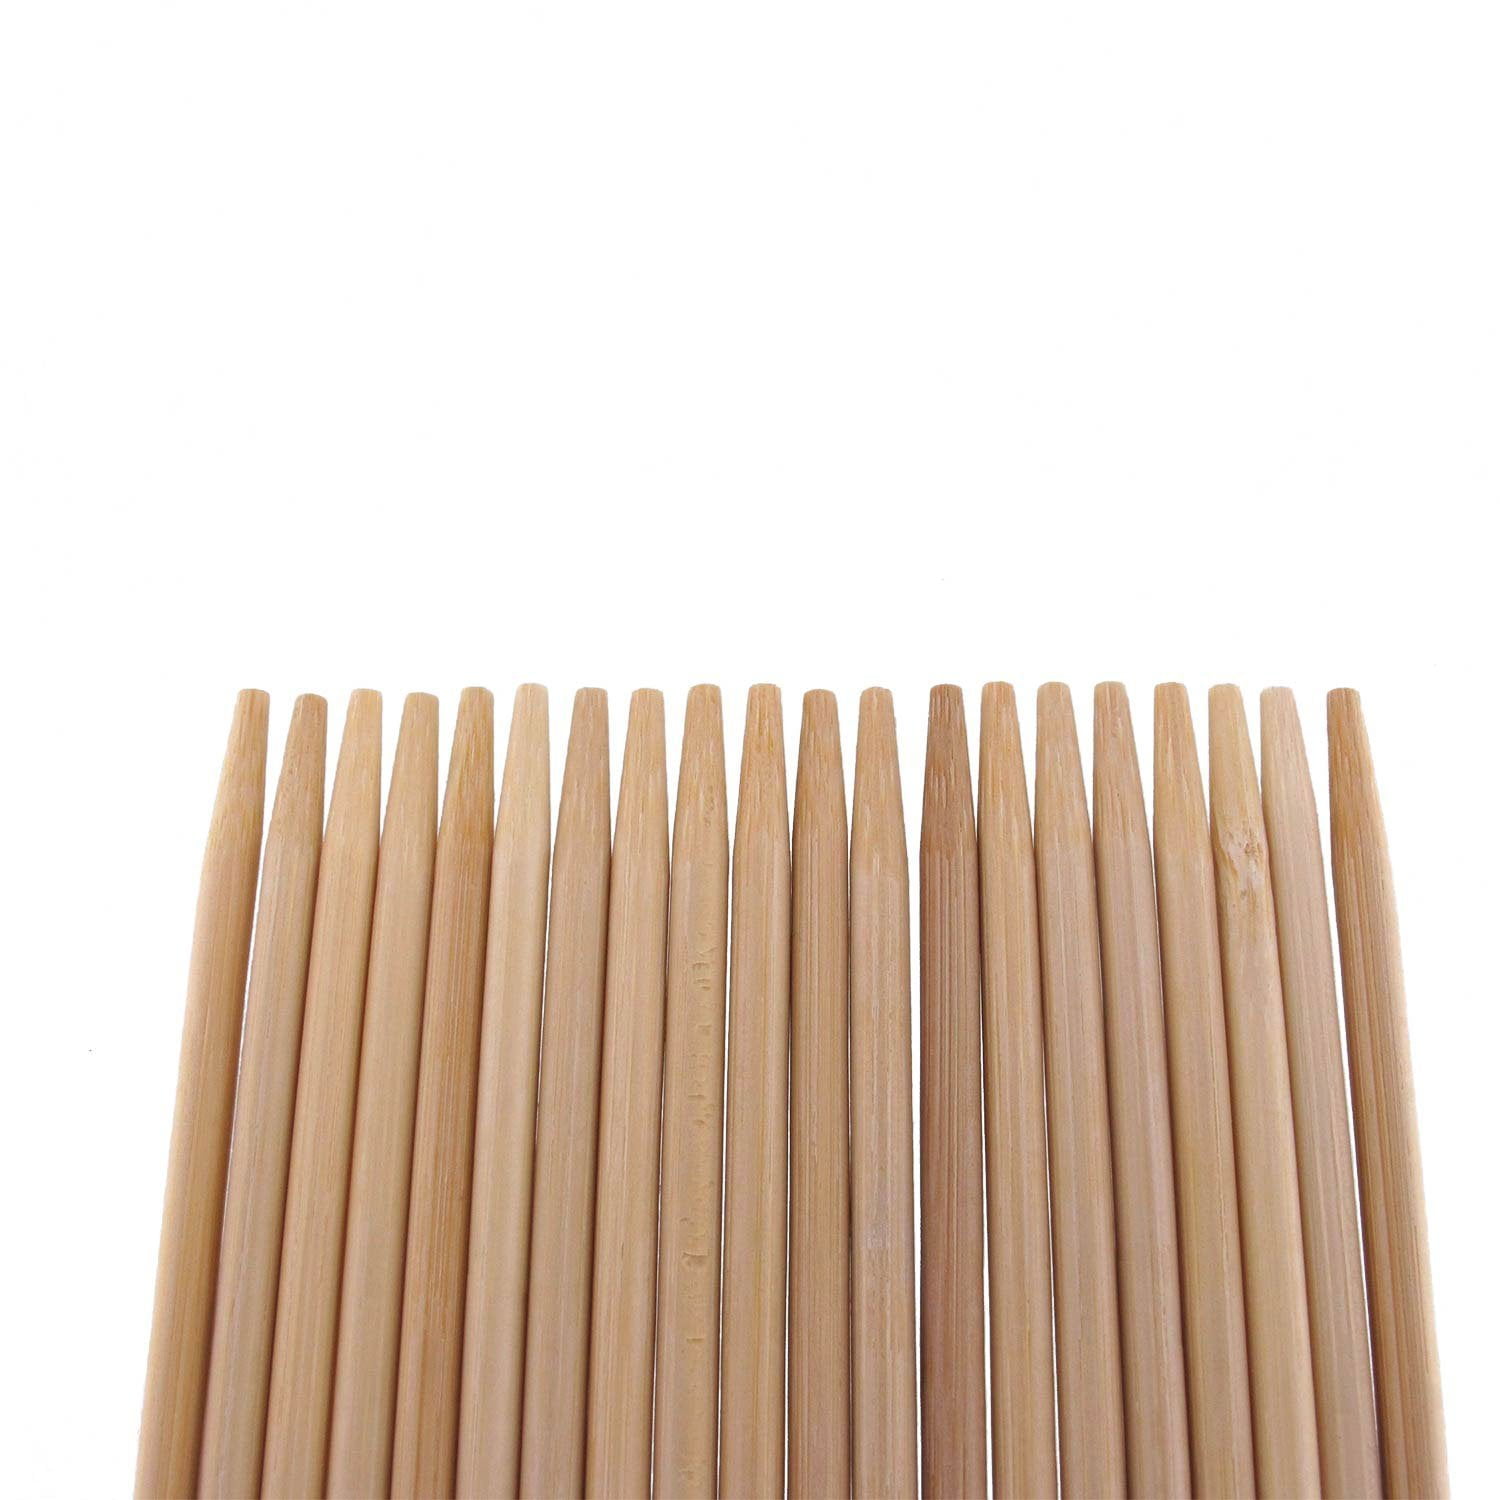 Garden Sticks 100 Pieces Perfect for Camping or Outdoor Party Long 5mm Thick Safe Multipurpose Tornado Twist Potato Bamboo Skewers 1.25ft BambooMN Premium 15 Inch 